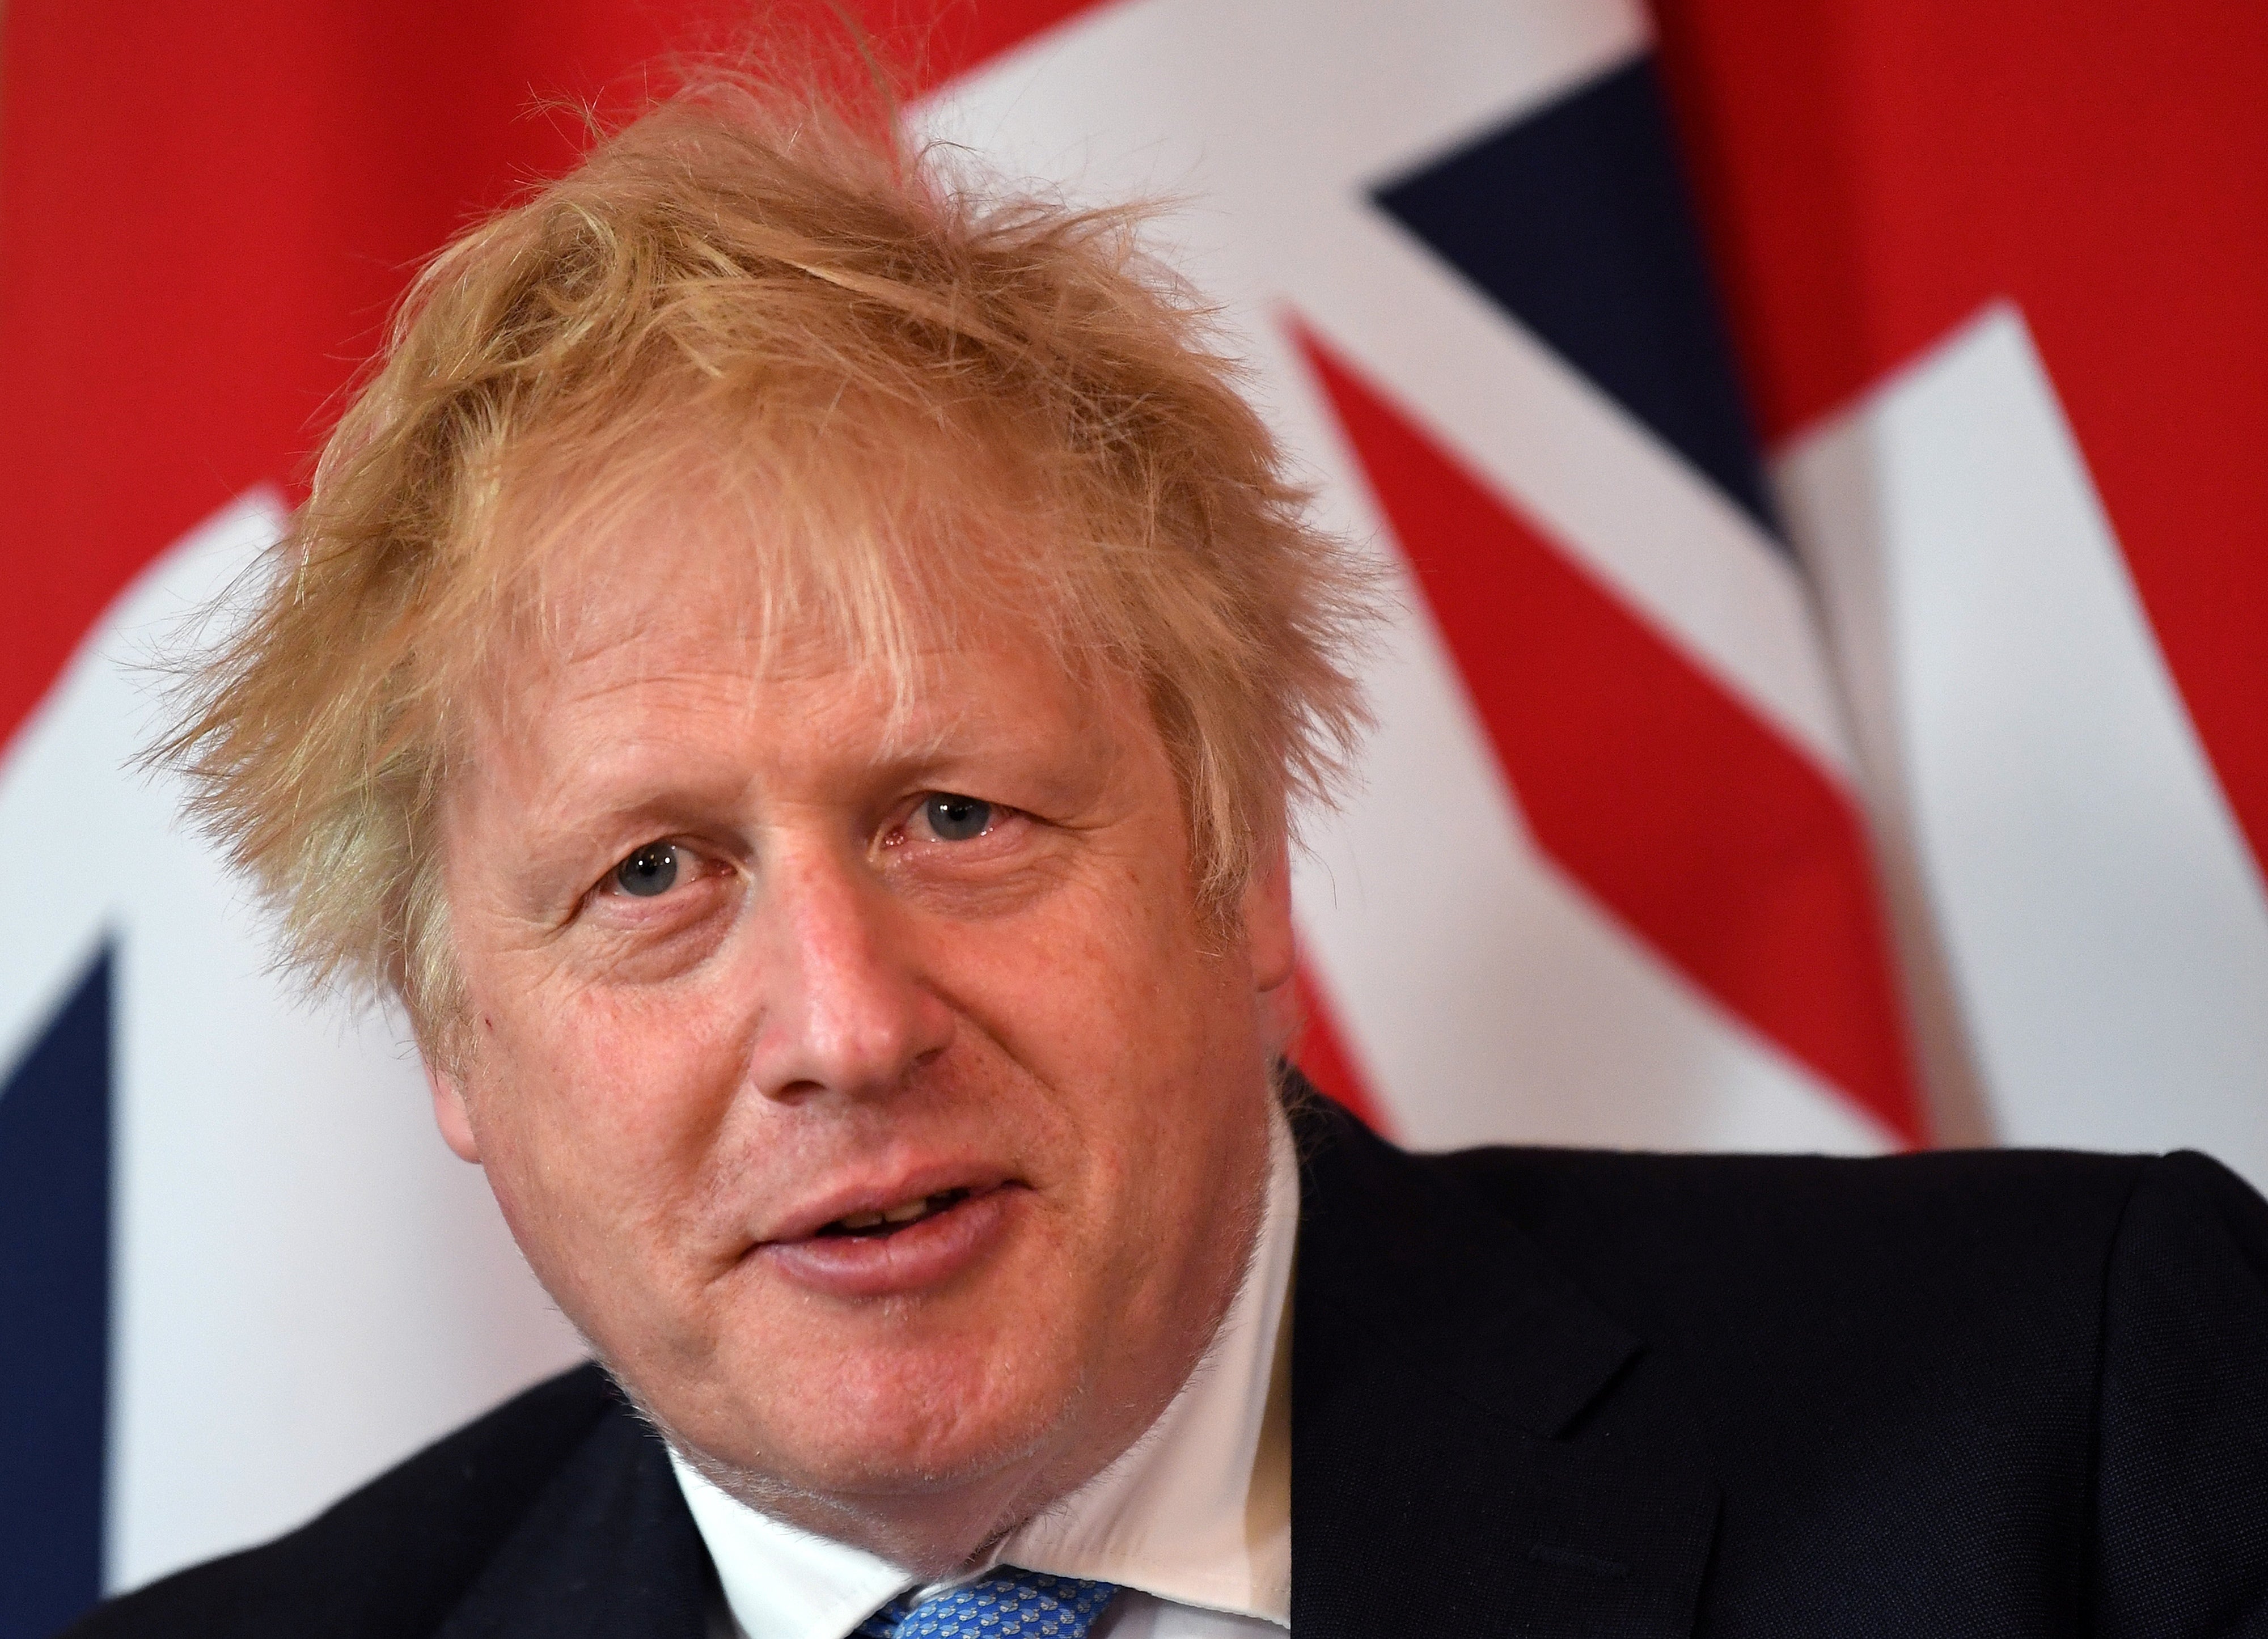 Prime Minister Boris Johnson is facing a vote in the Commons on whether he misled MPs about the partygate claims (Daniel Leal/PA)